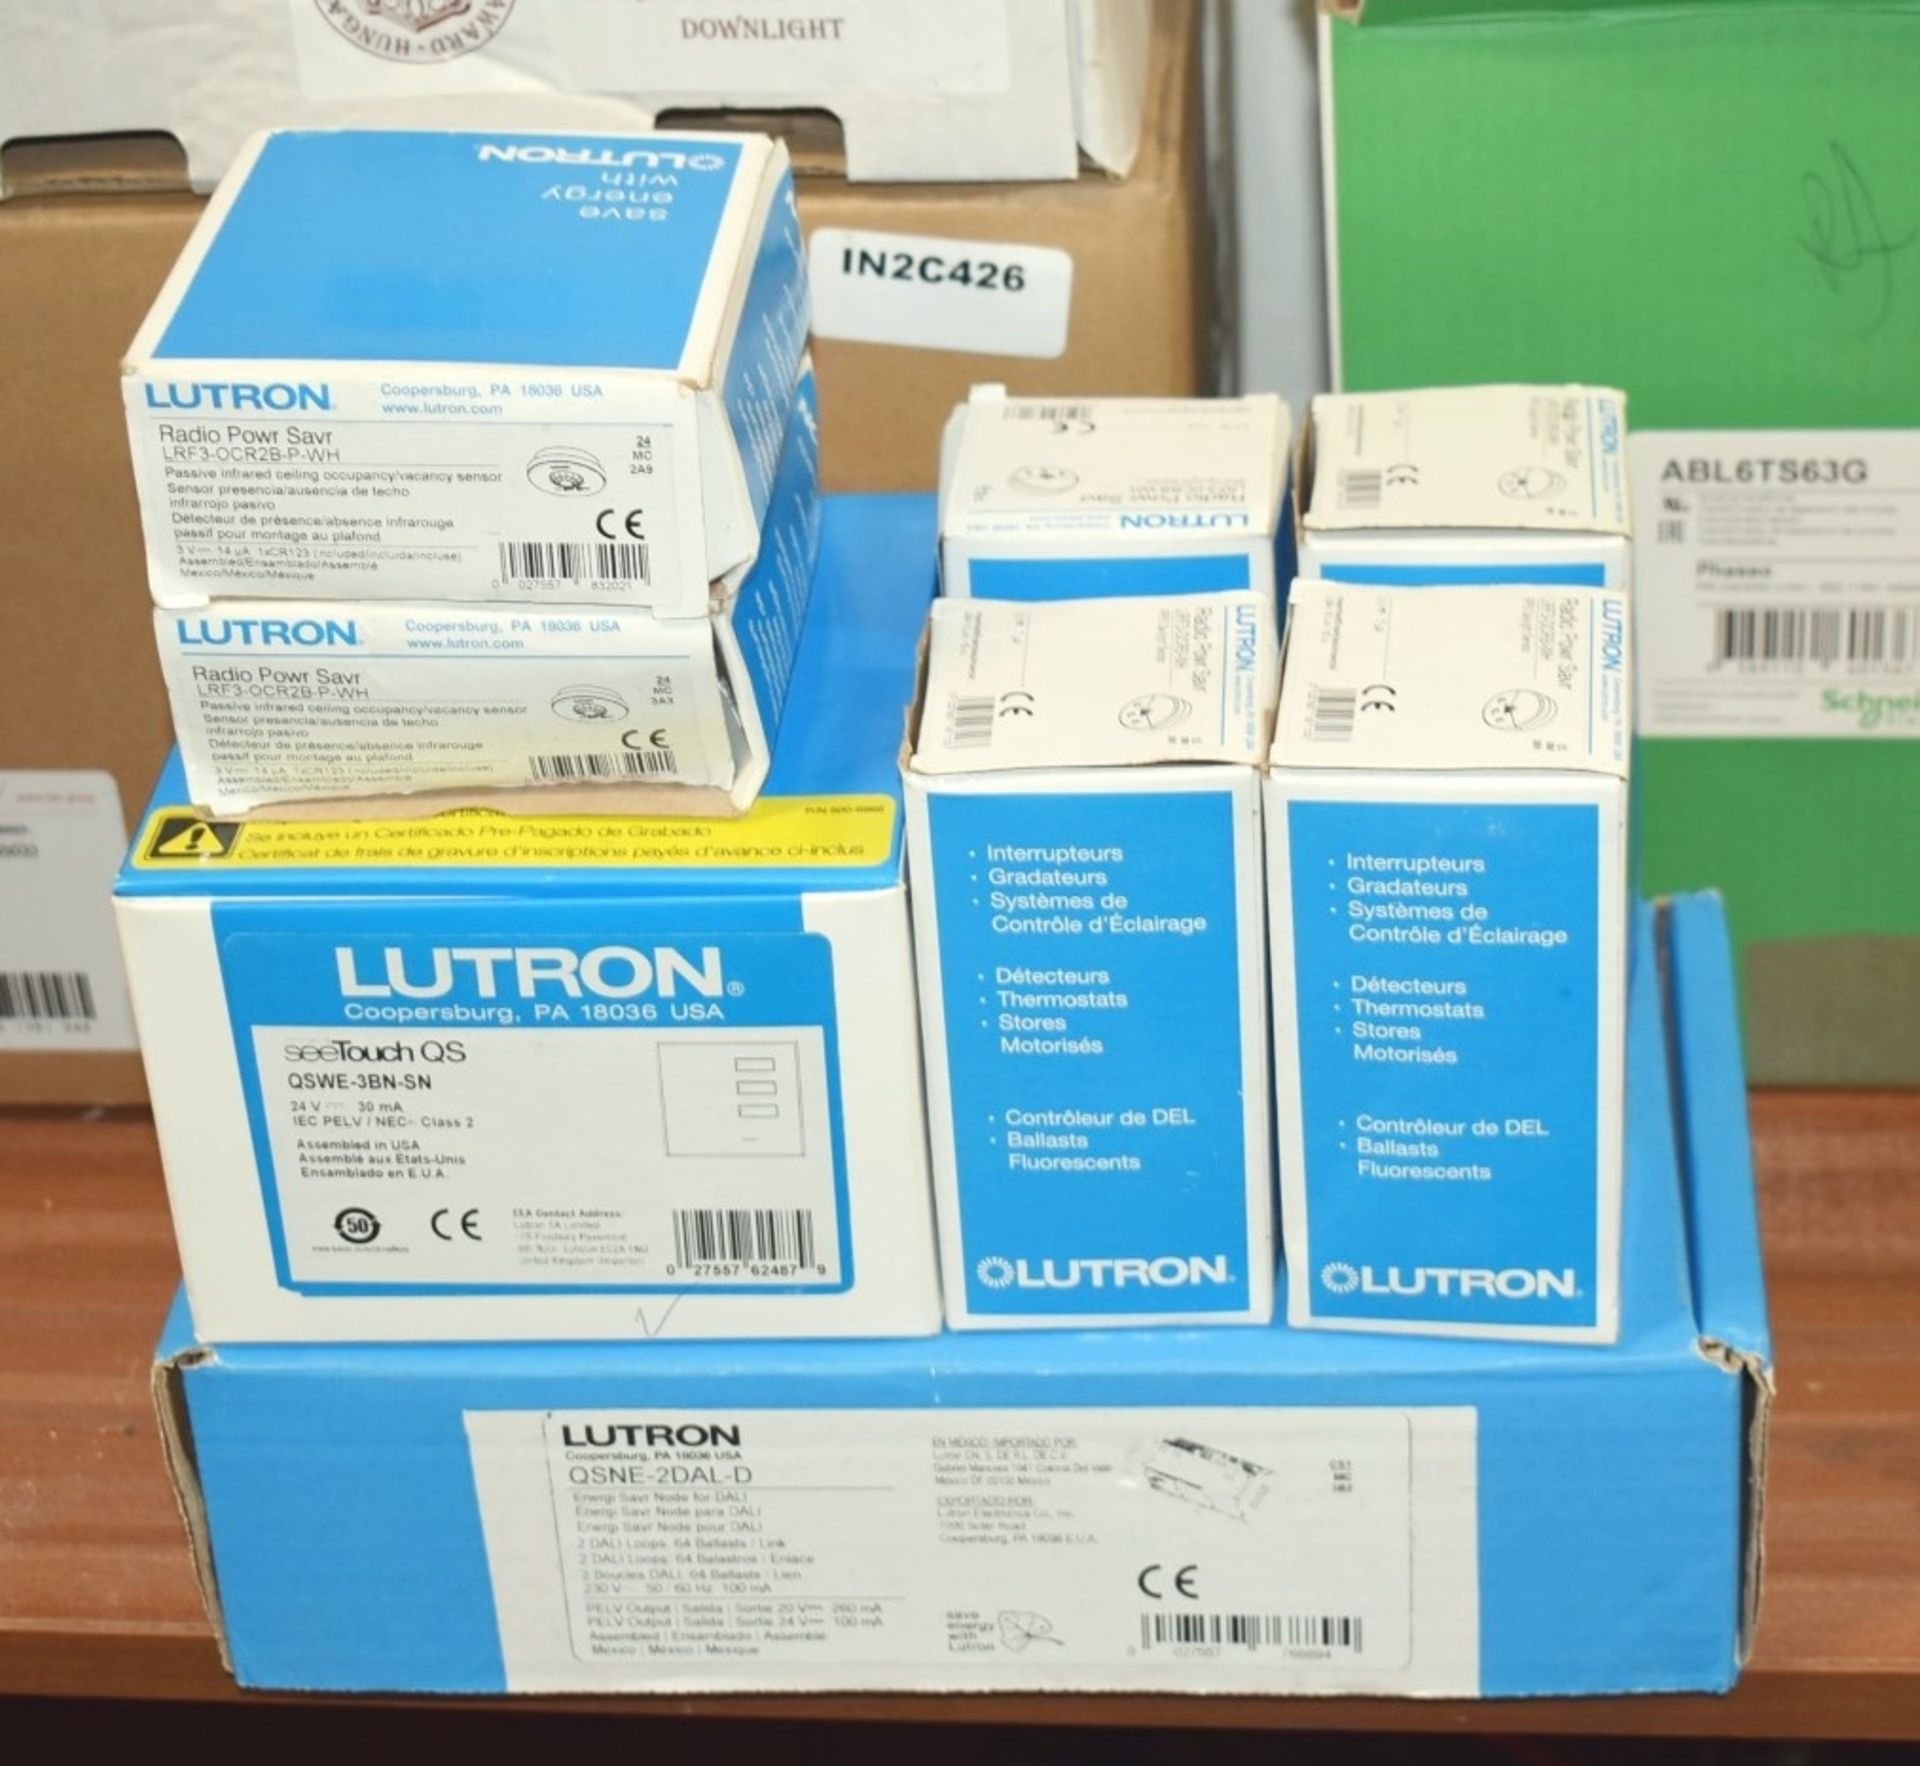 8 x Lutron Products Including Wall Switch, Energy Saving Node and Sensors -New/Unused - RRP £1,850 - Image 11 of 13